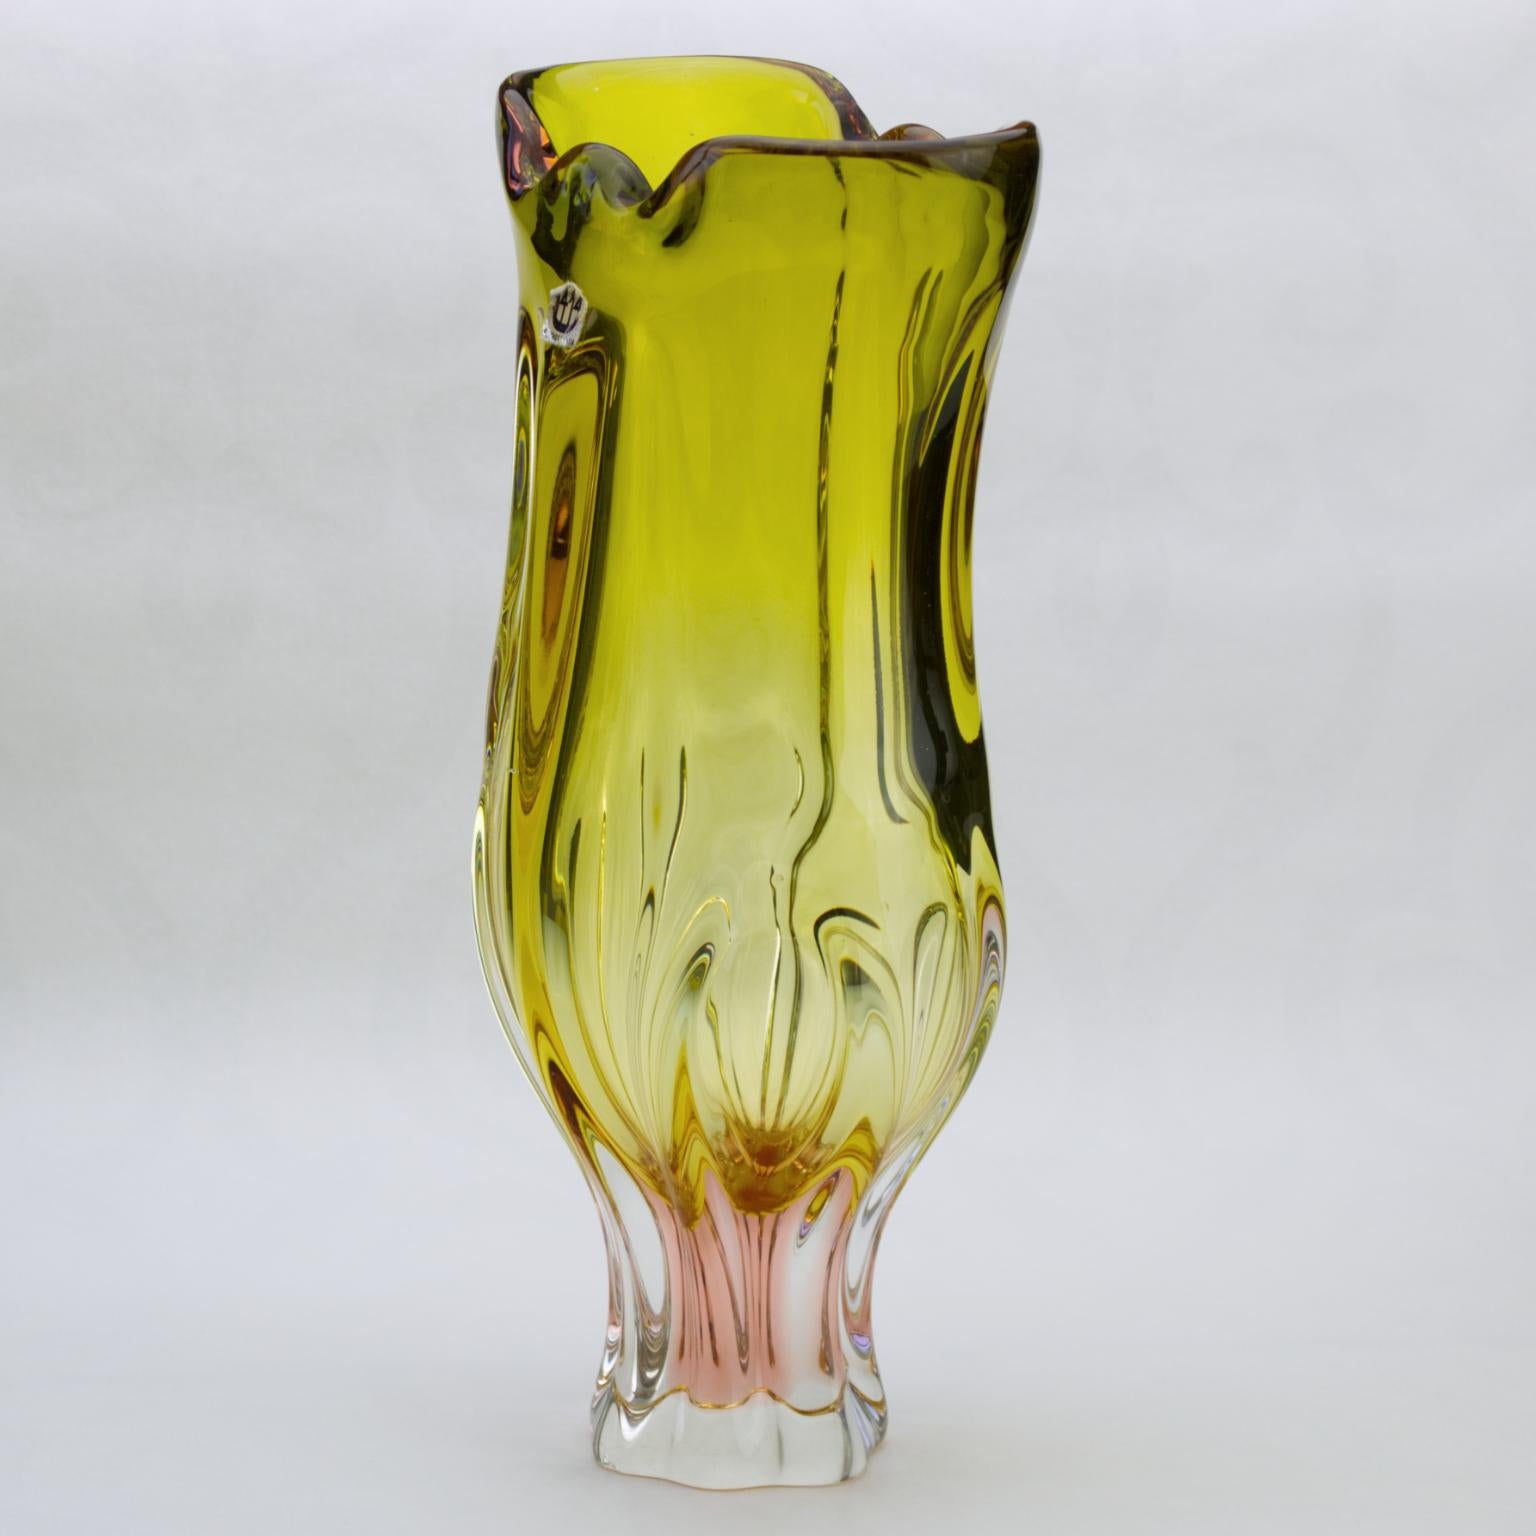 This wonderful high massive art glass vase made in yellow and pink color glass with clear massive base and lotus flower shaped top was designed by Josef Hospodka and made in the 1960s by Chribska glasswork.
The Chribska glassworks, full name